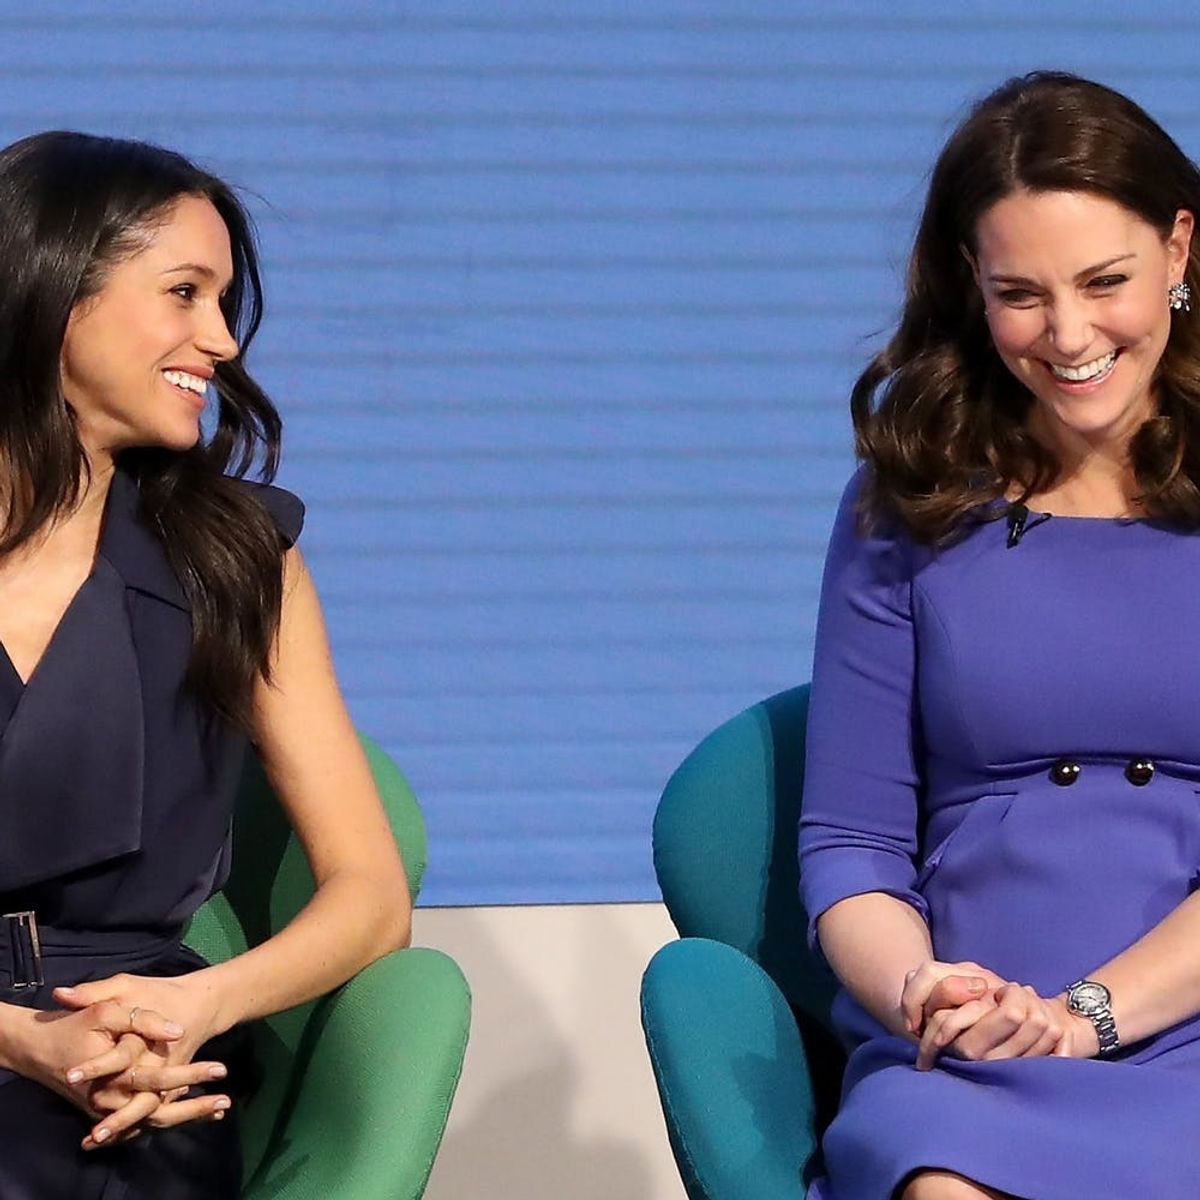 Prince William, Kate Middleton, Prince Harry, and Meghan Markle Just Made Their First Official Appearance Together